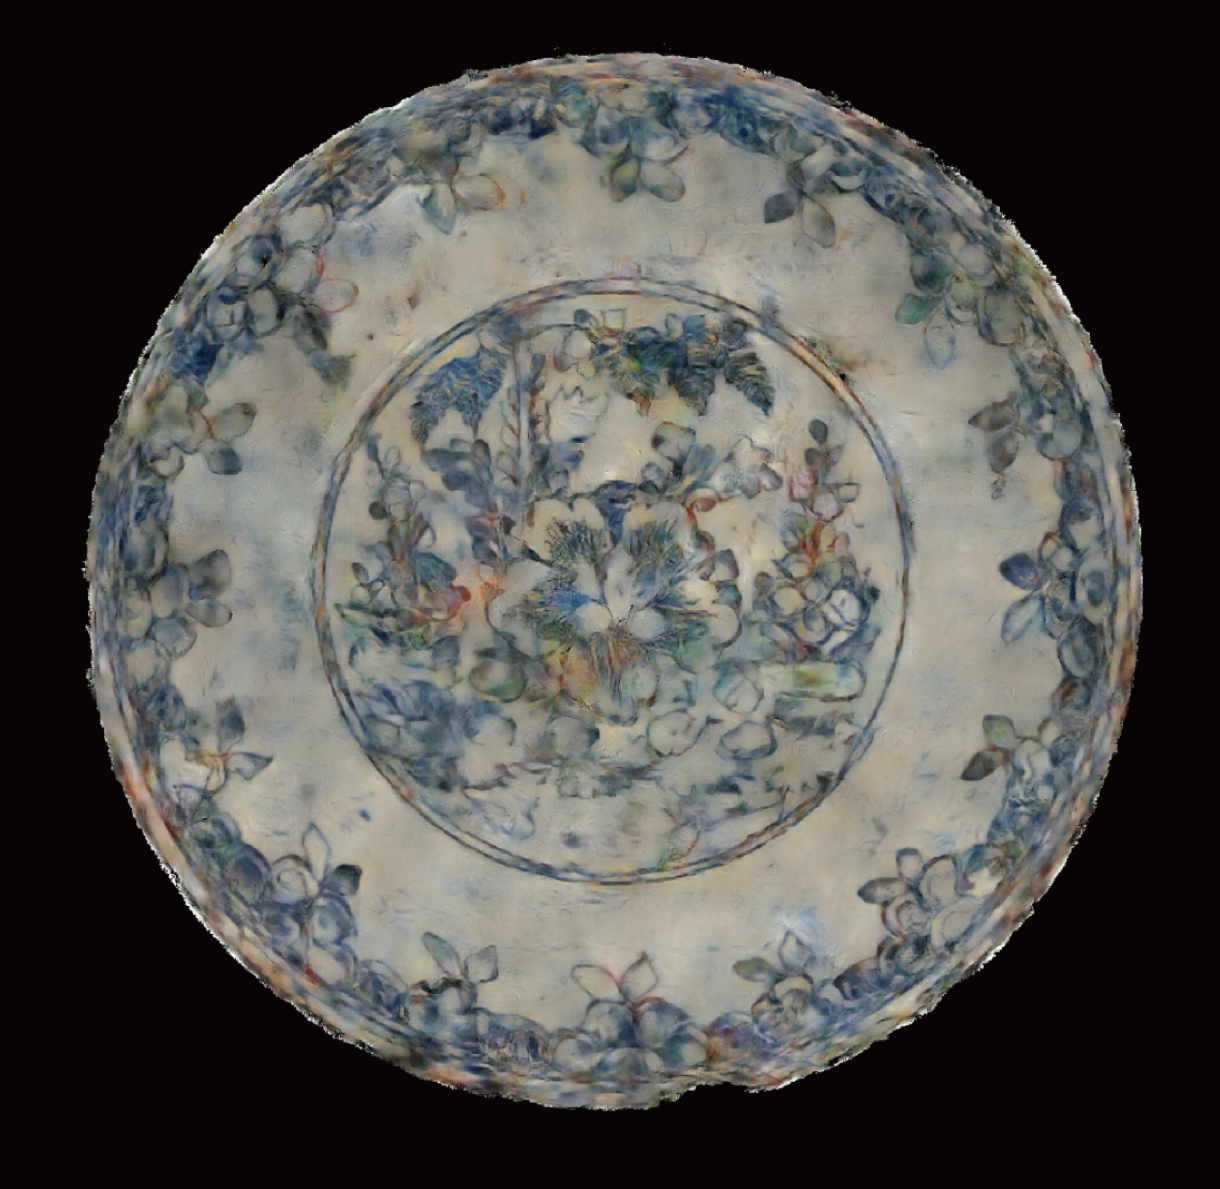 Blue and white porcelain plate